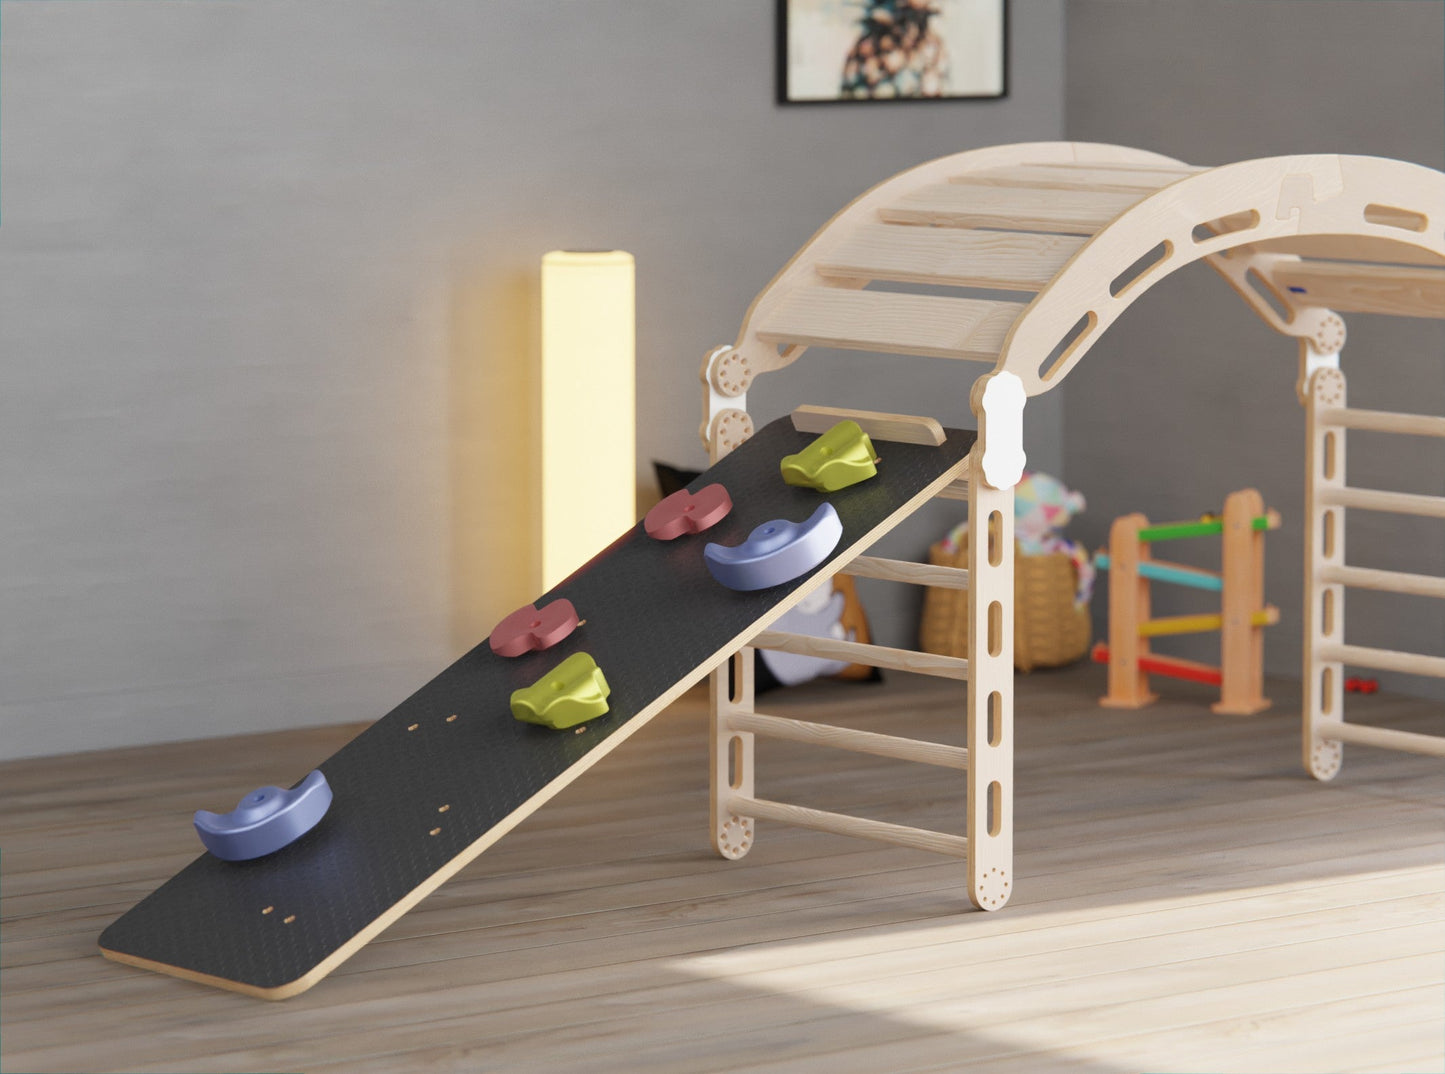 Invest in your child's development with our Wooden Pikler Triangle & Arch - versatile equipment for strength and logic-building.